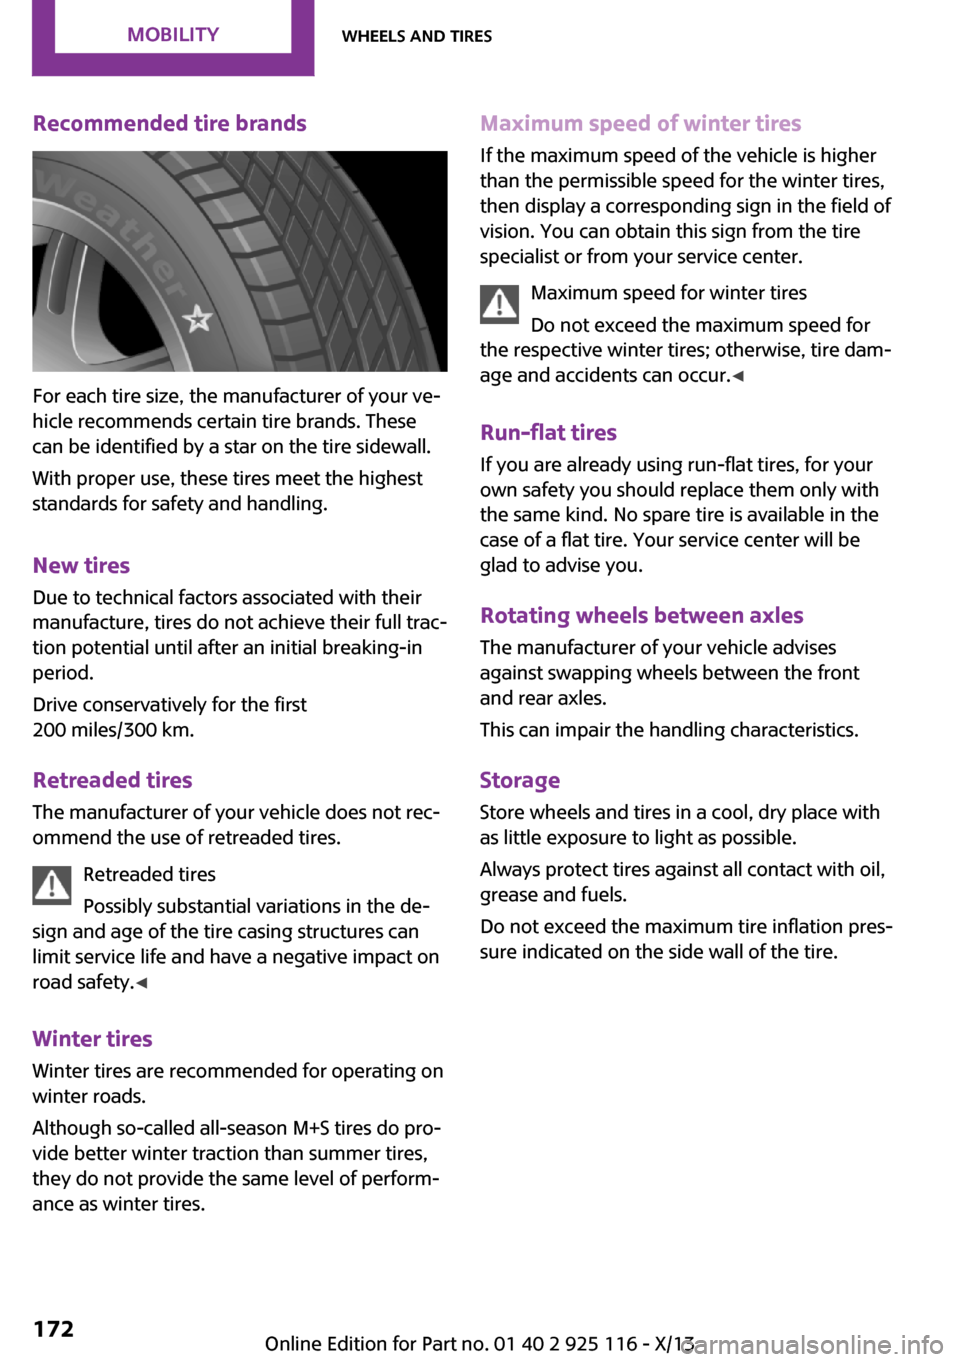 MINI 3 door 2013  Owners Manual Recommended tire brands
For each tire size, the manufacturer of your ve‐
hicle recommends certain tire brands. These
can be identified by a star on the tire sidewall.
With proper use, these tires me